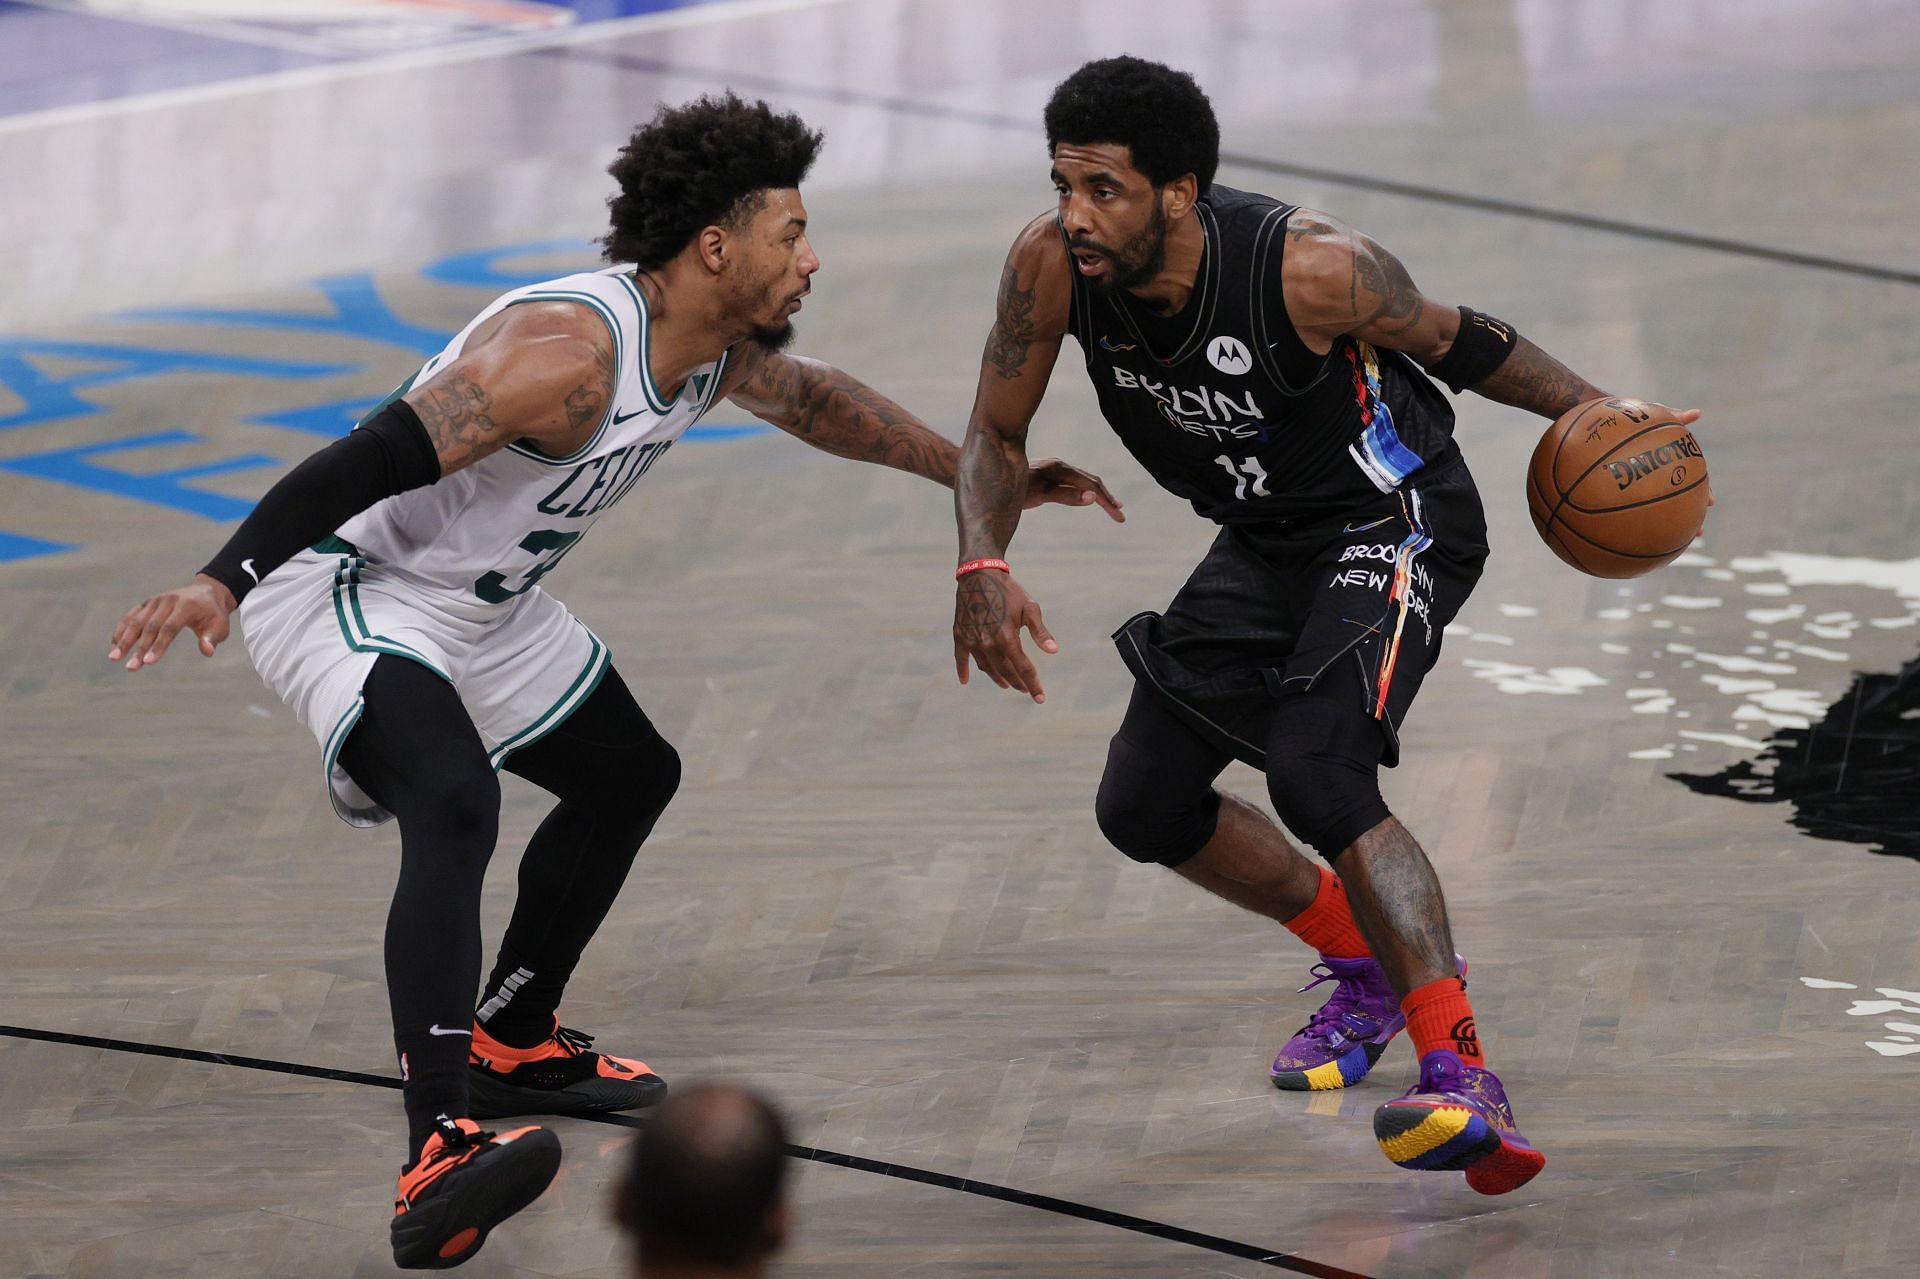 Kyrie Irving of the Brooklyn Nets dribbles as Marcus Smart of the Boston Celtics defends